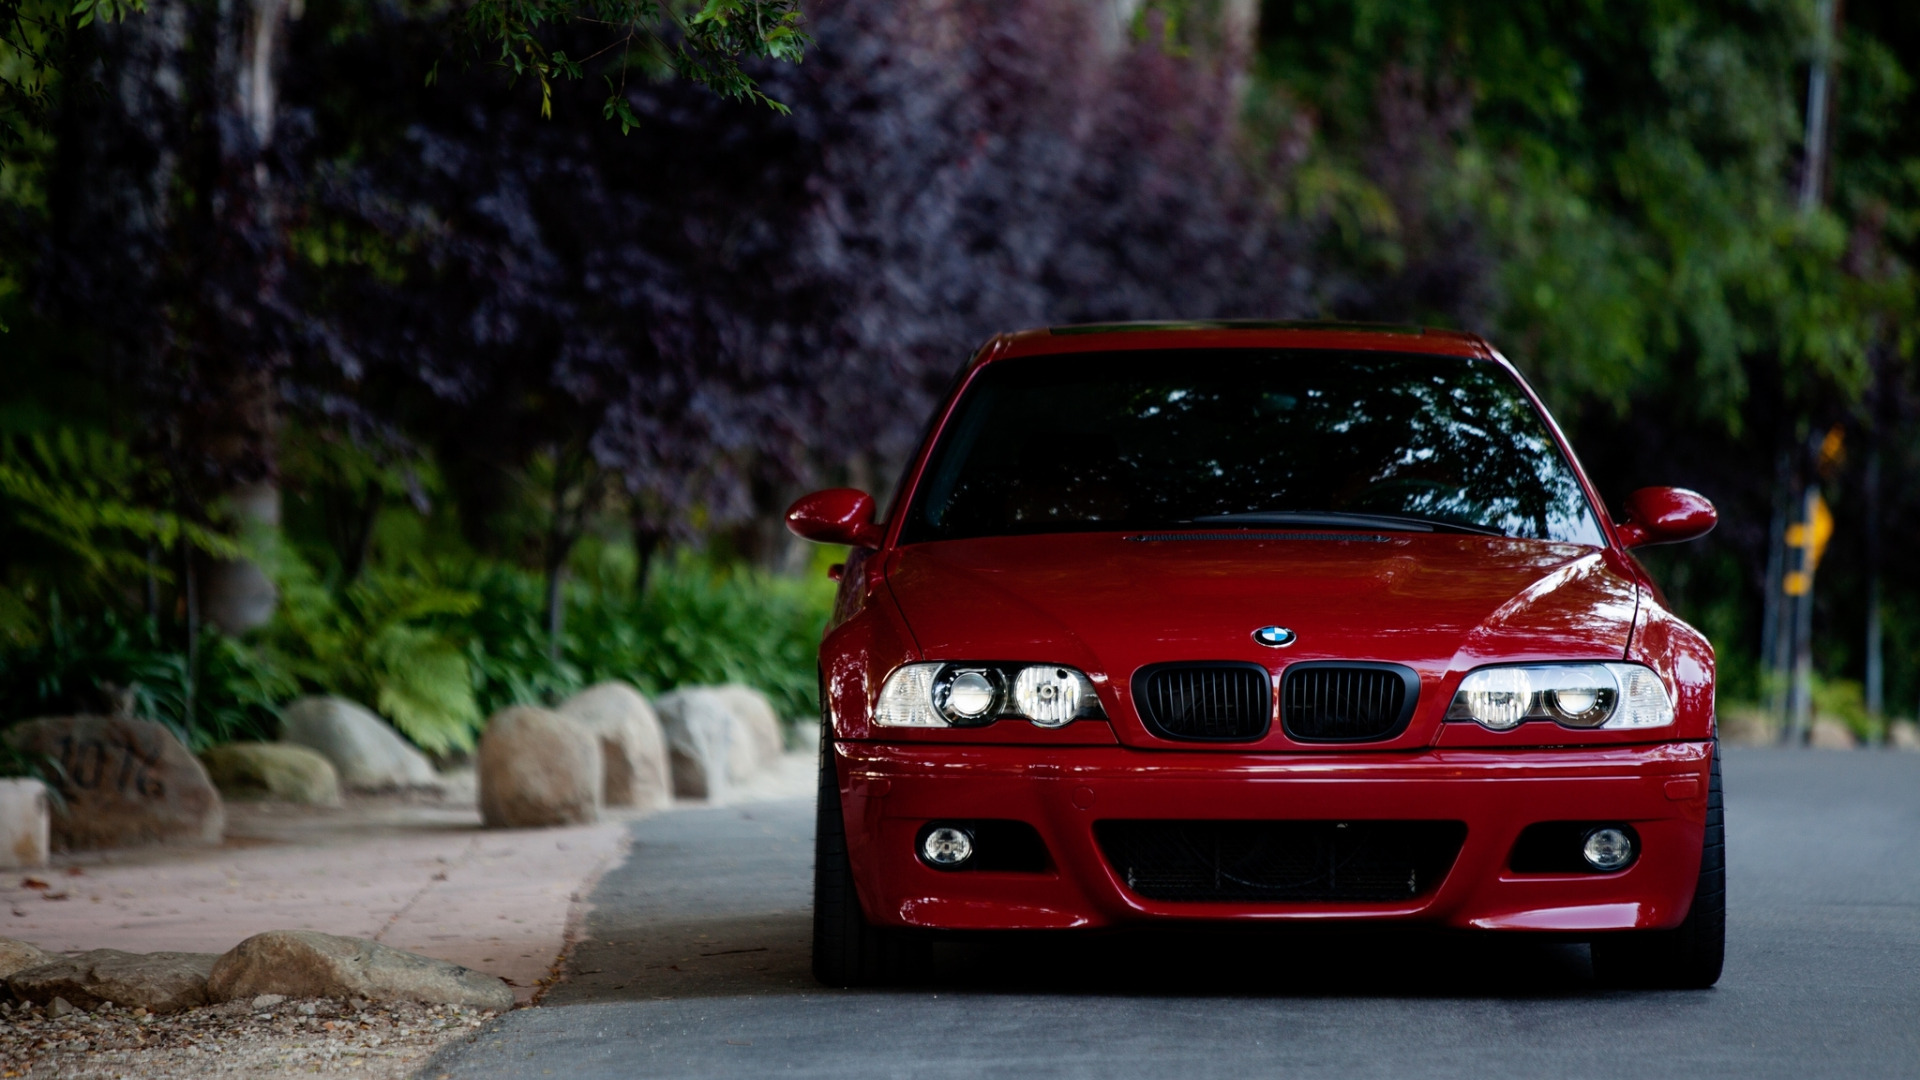 Download Wallpaper Road Red Stones Bmw Bmw Red The Front E46